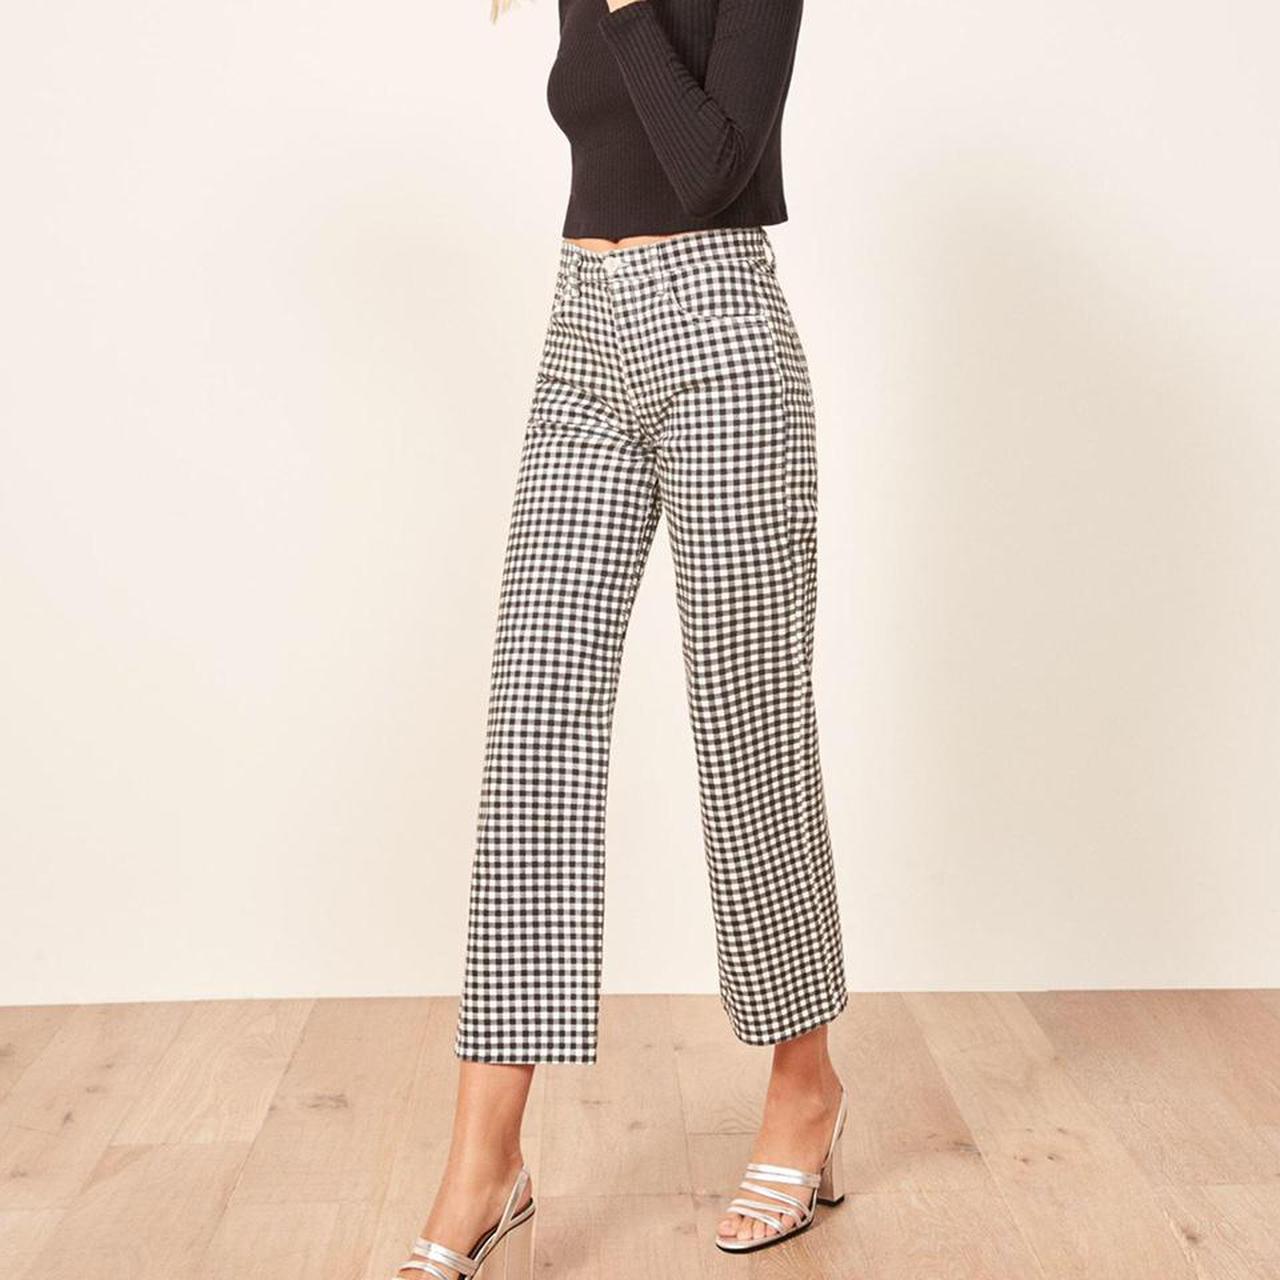 Product Image 1 - Reformation Fawcett Jeans. High waisted